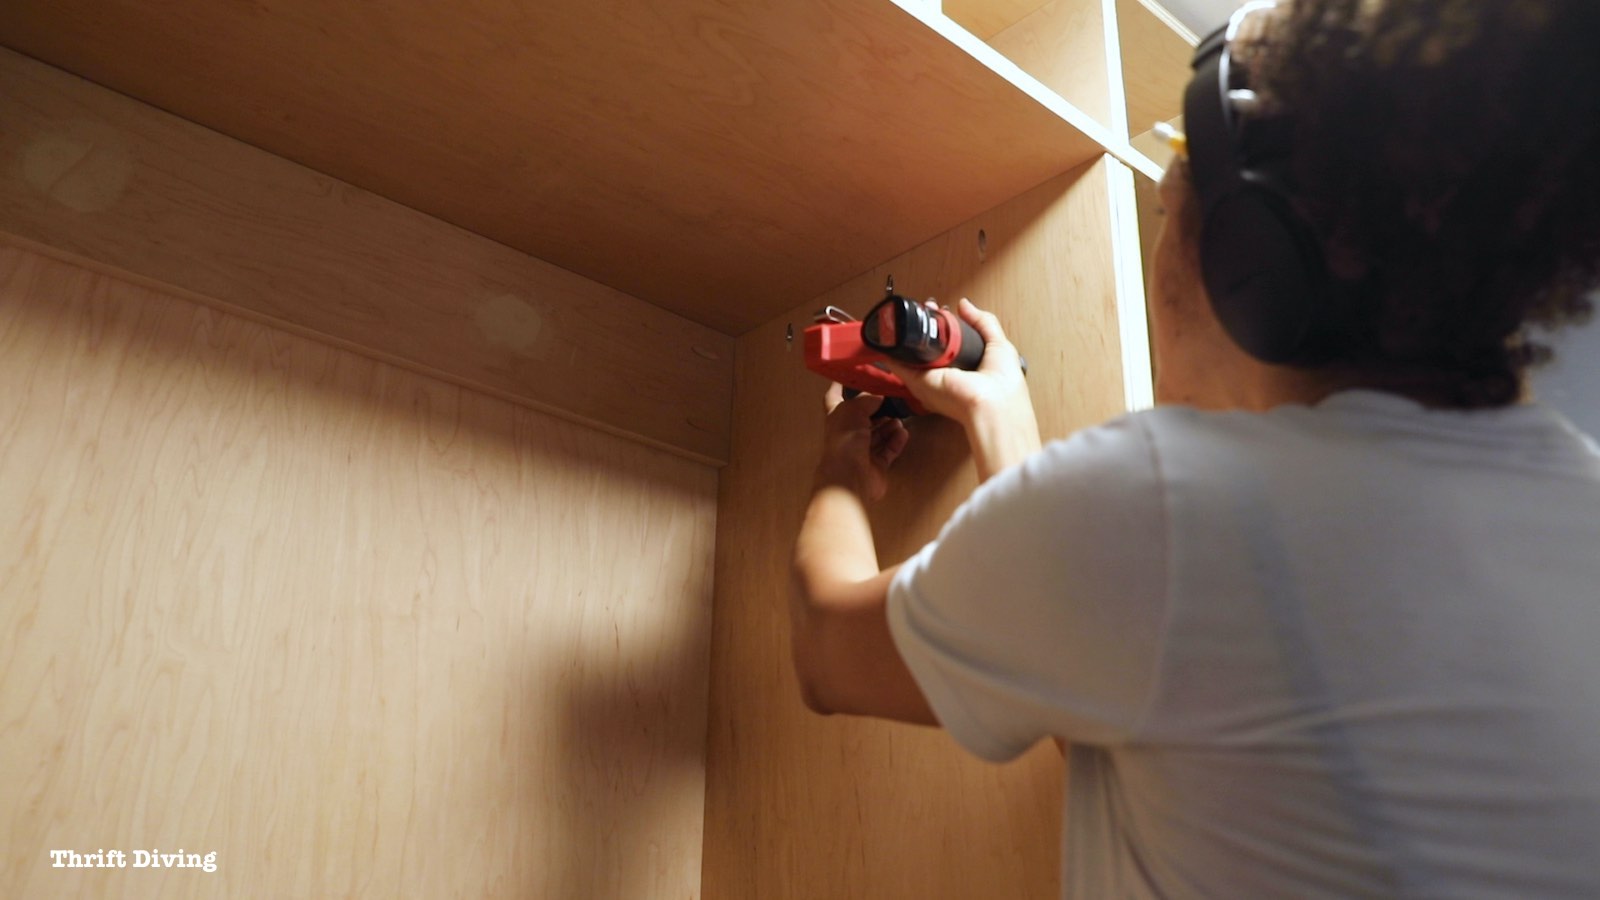 How to Build a Walk-in Closet Organizer From Scratch - Use pocket hole screws to secure partitions to top panels. - Thrift Diving